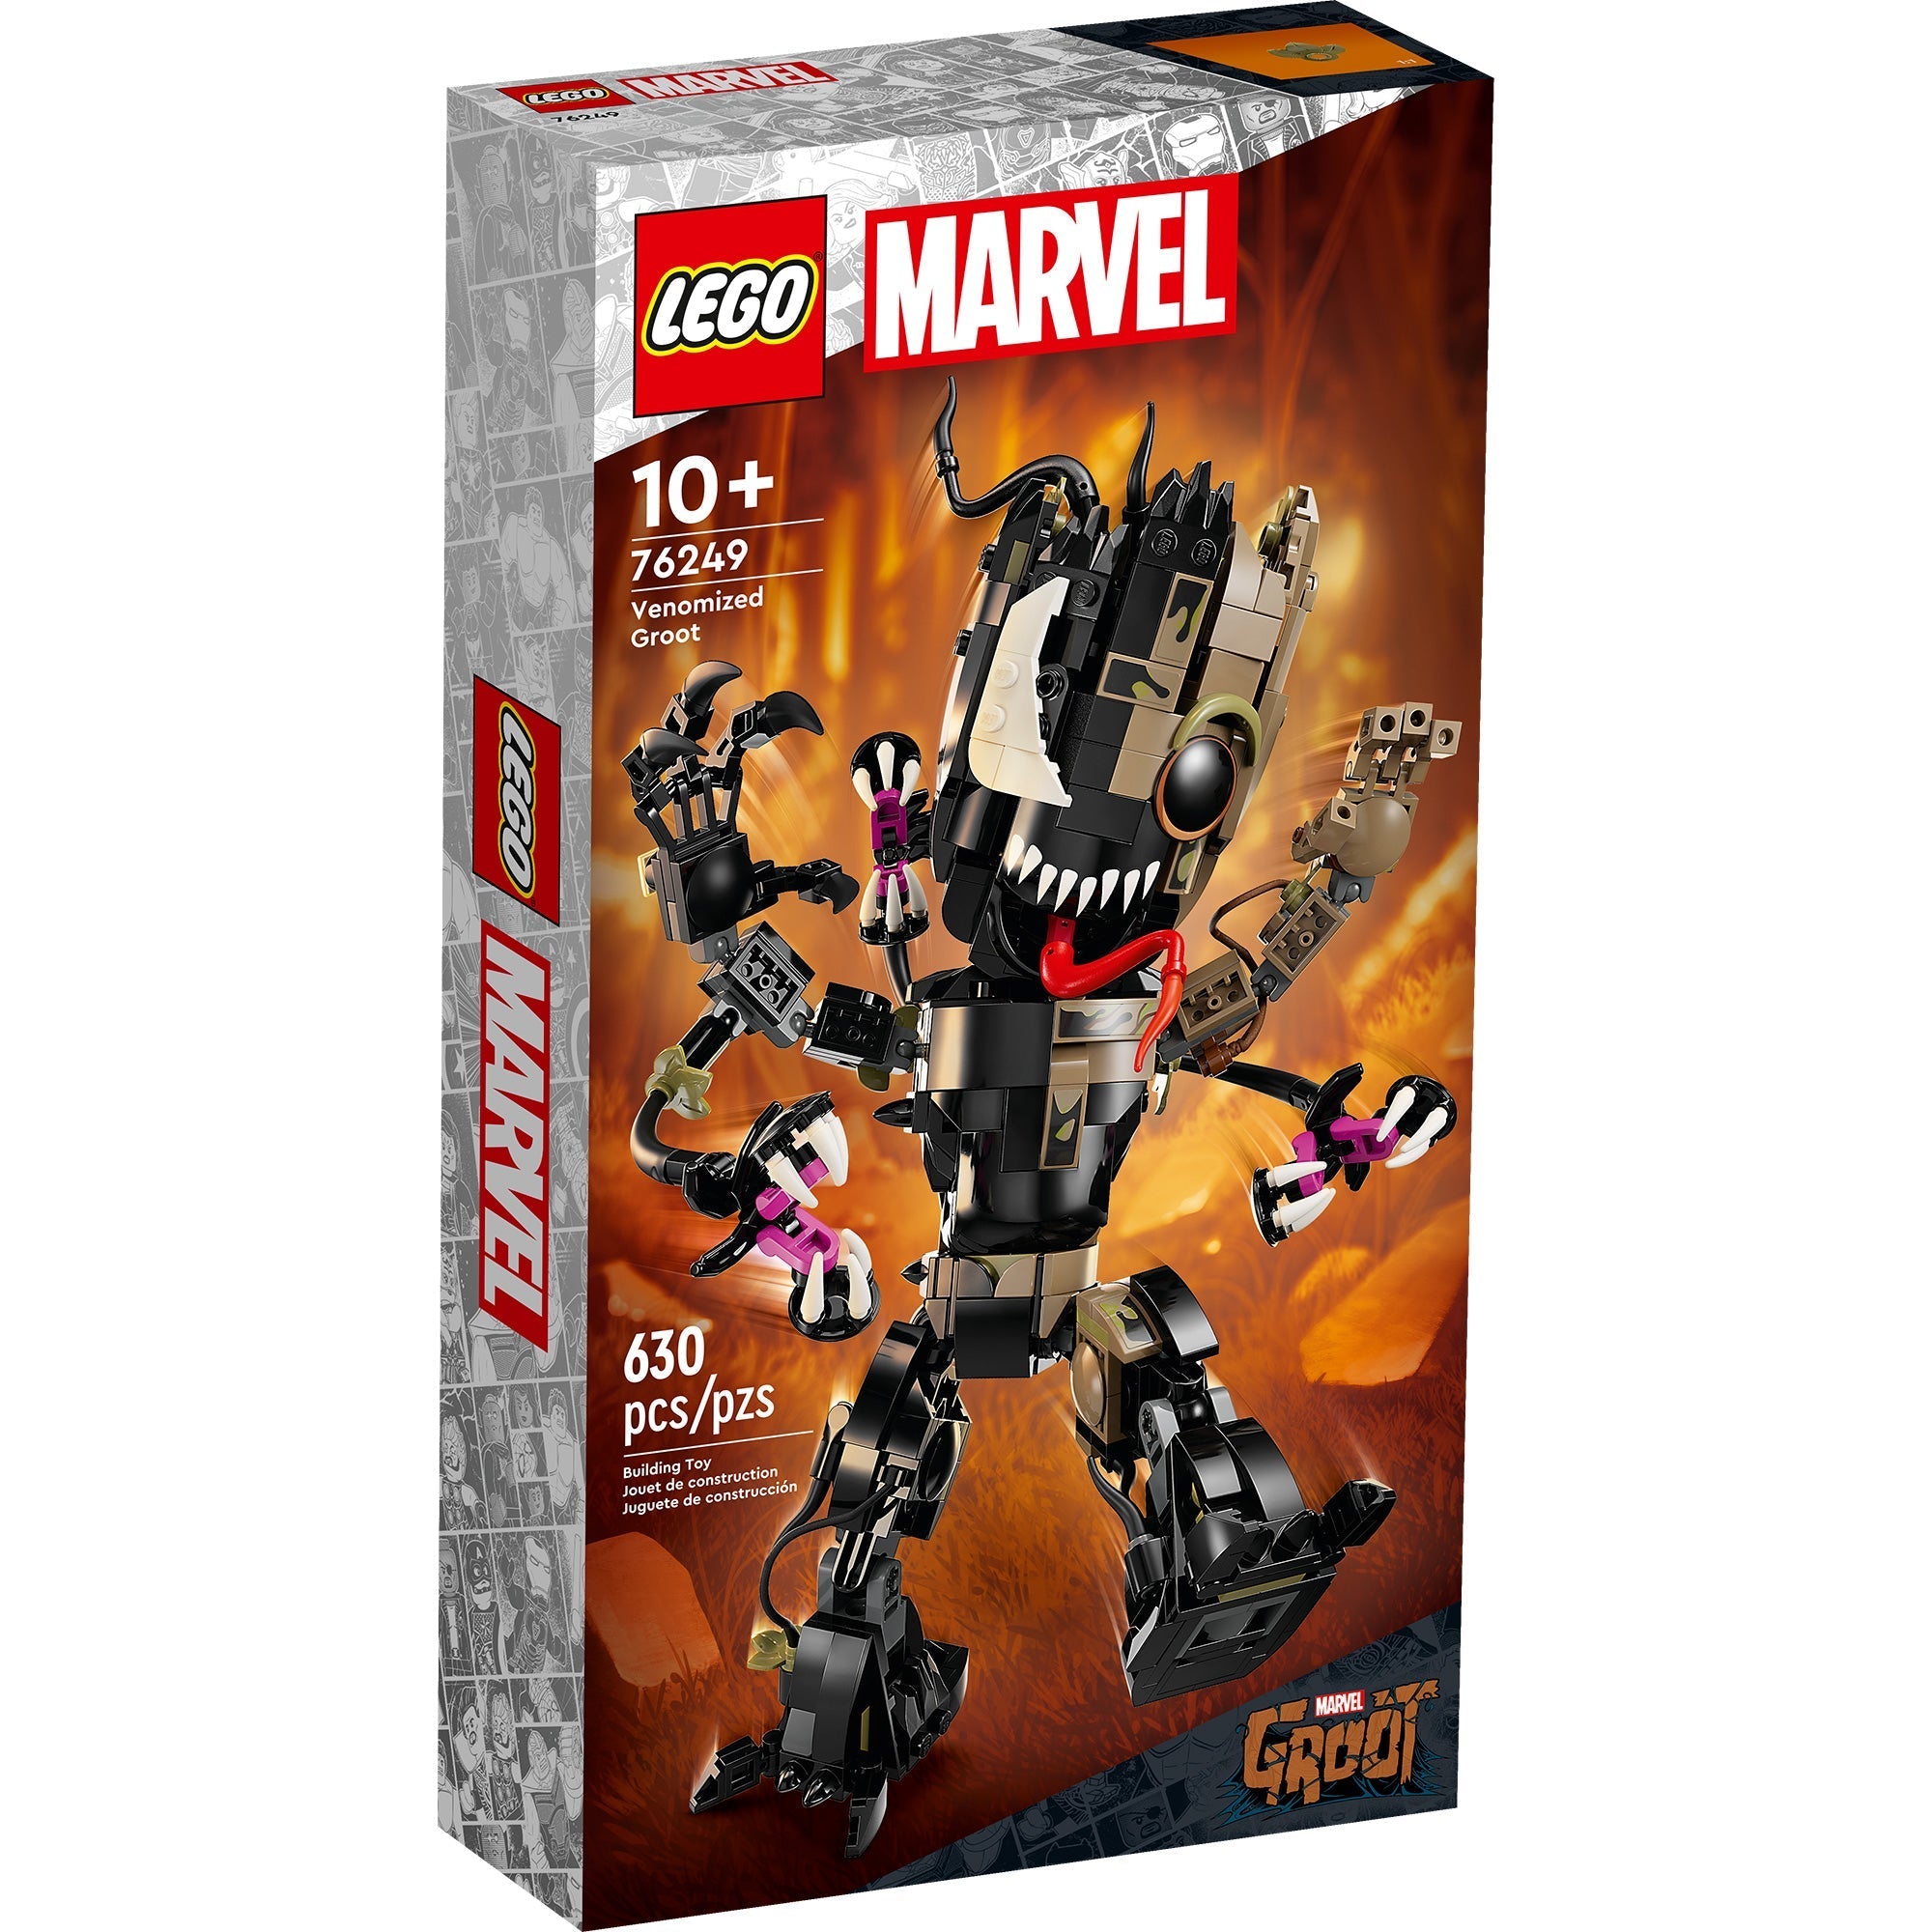 LEGO Marvel Guardians of the Galaxy Headquarters 76253, Super Hero Building  Toy Set from Guardians of the Galaxy 3 with Groot and Star-Lord  Minifigures, Gift for Kids, Boys and Girls Ages 7